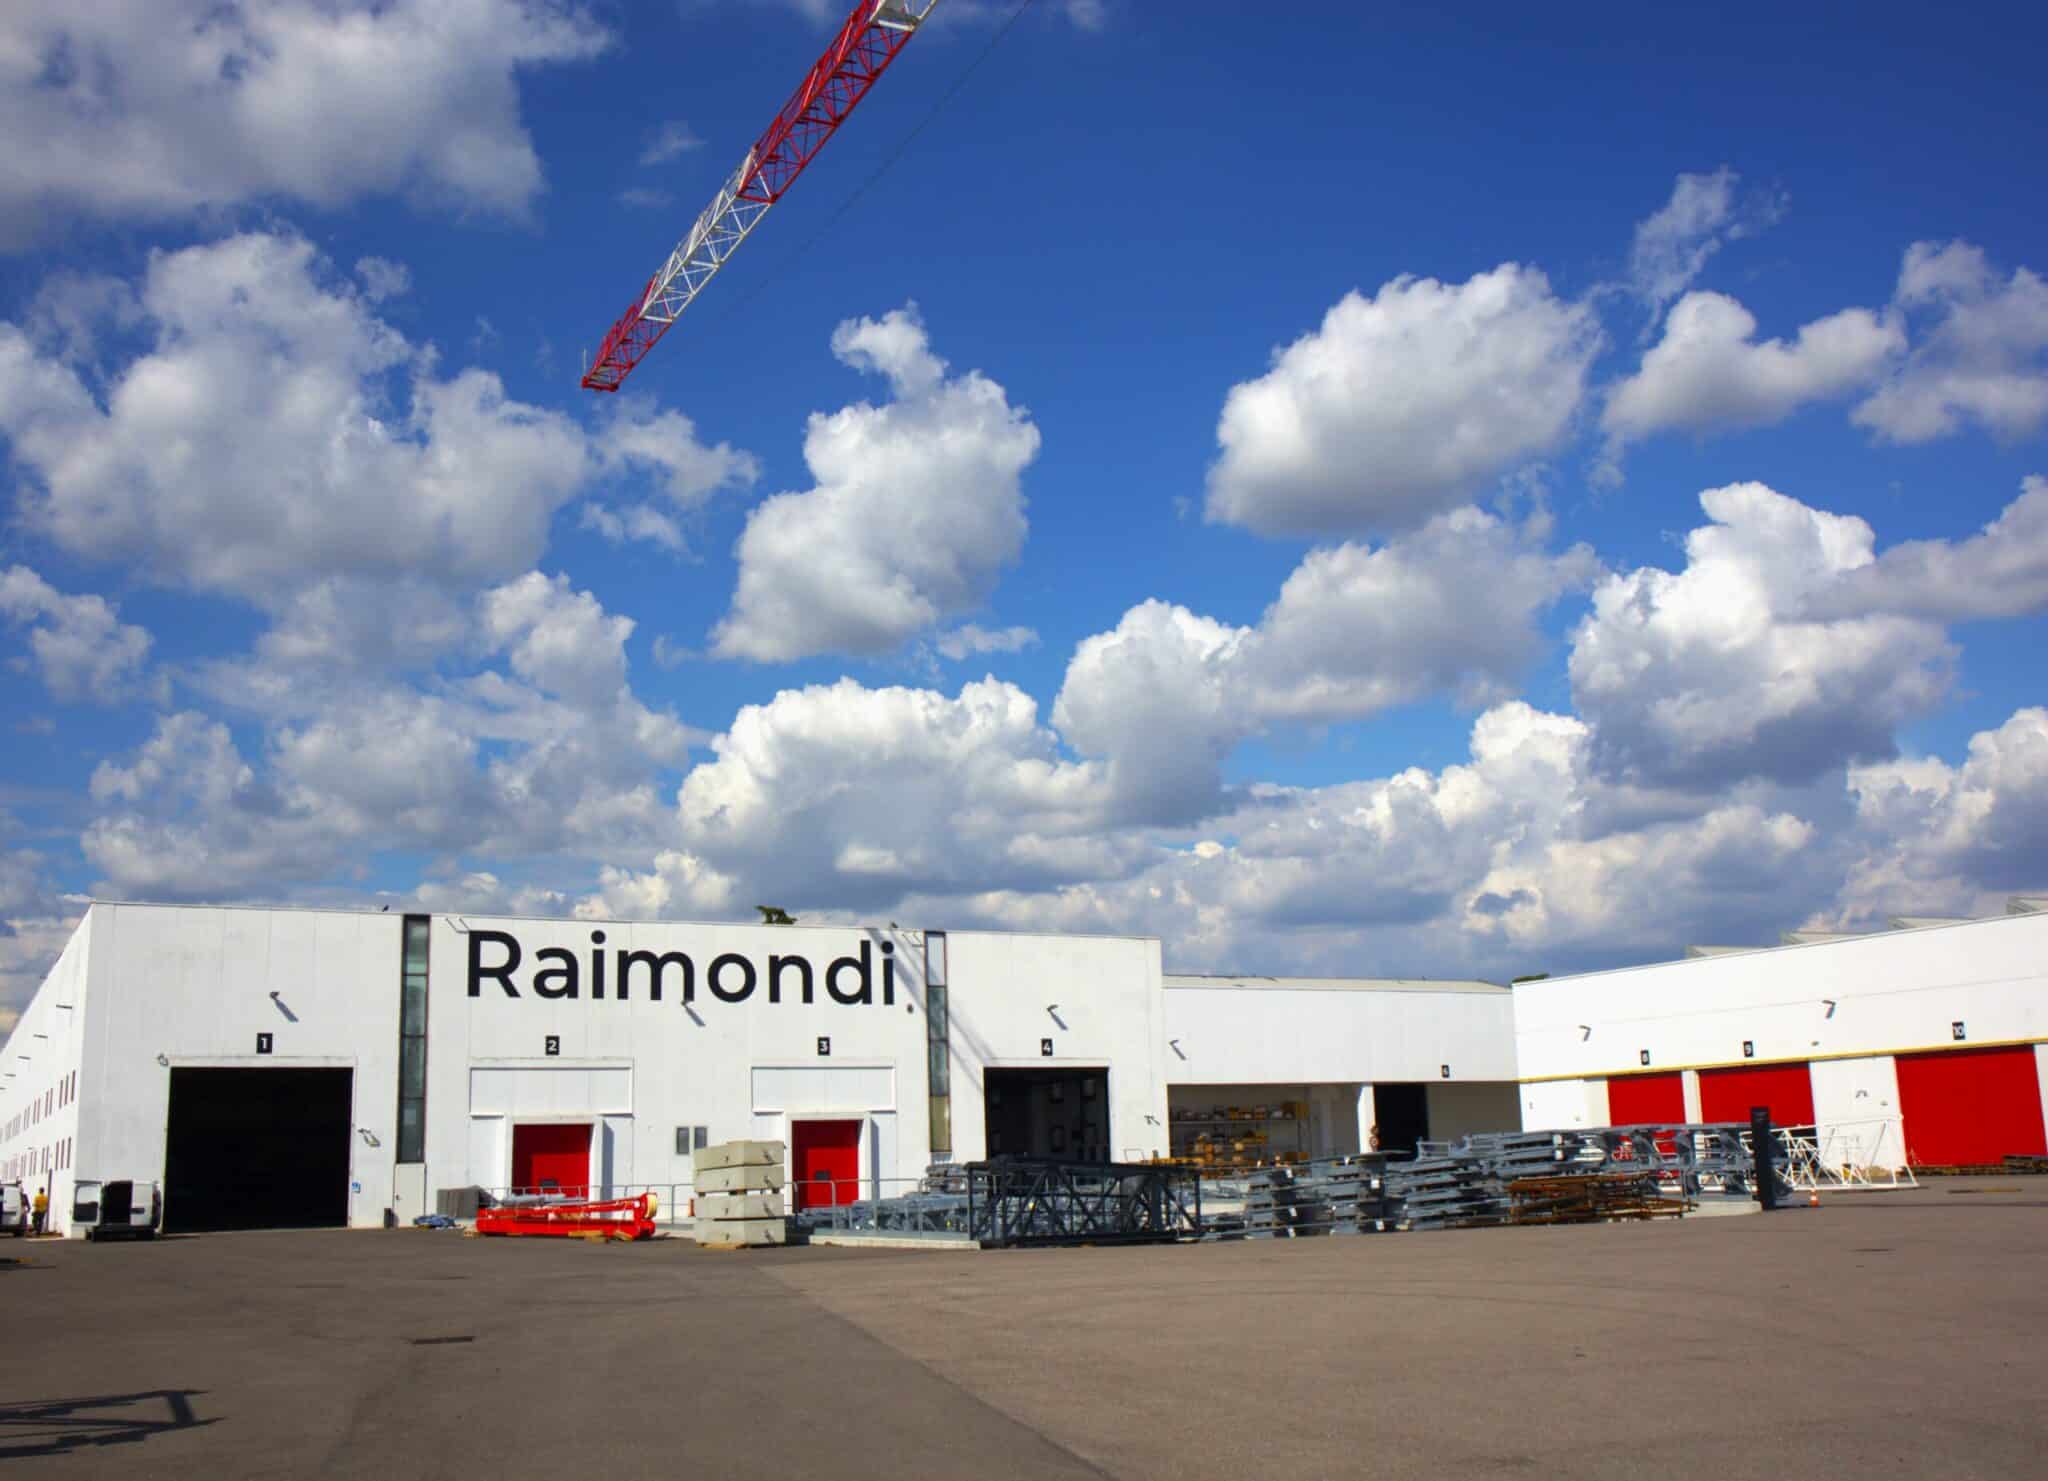 In Pictures: Field experts from Italy and Ireland join product trainings at Raimondi Cranes HQ